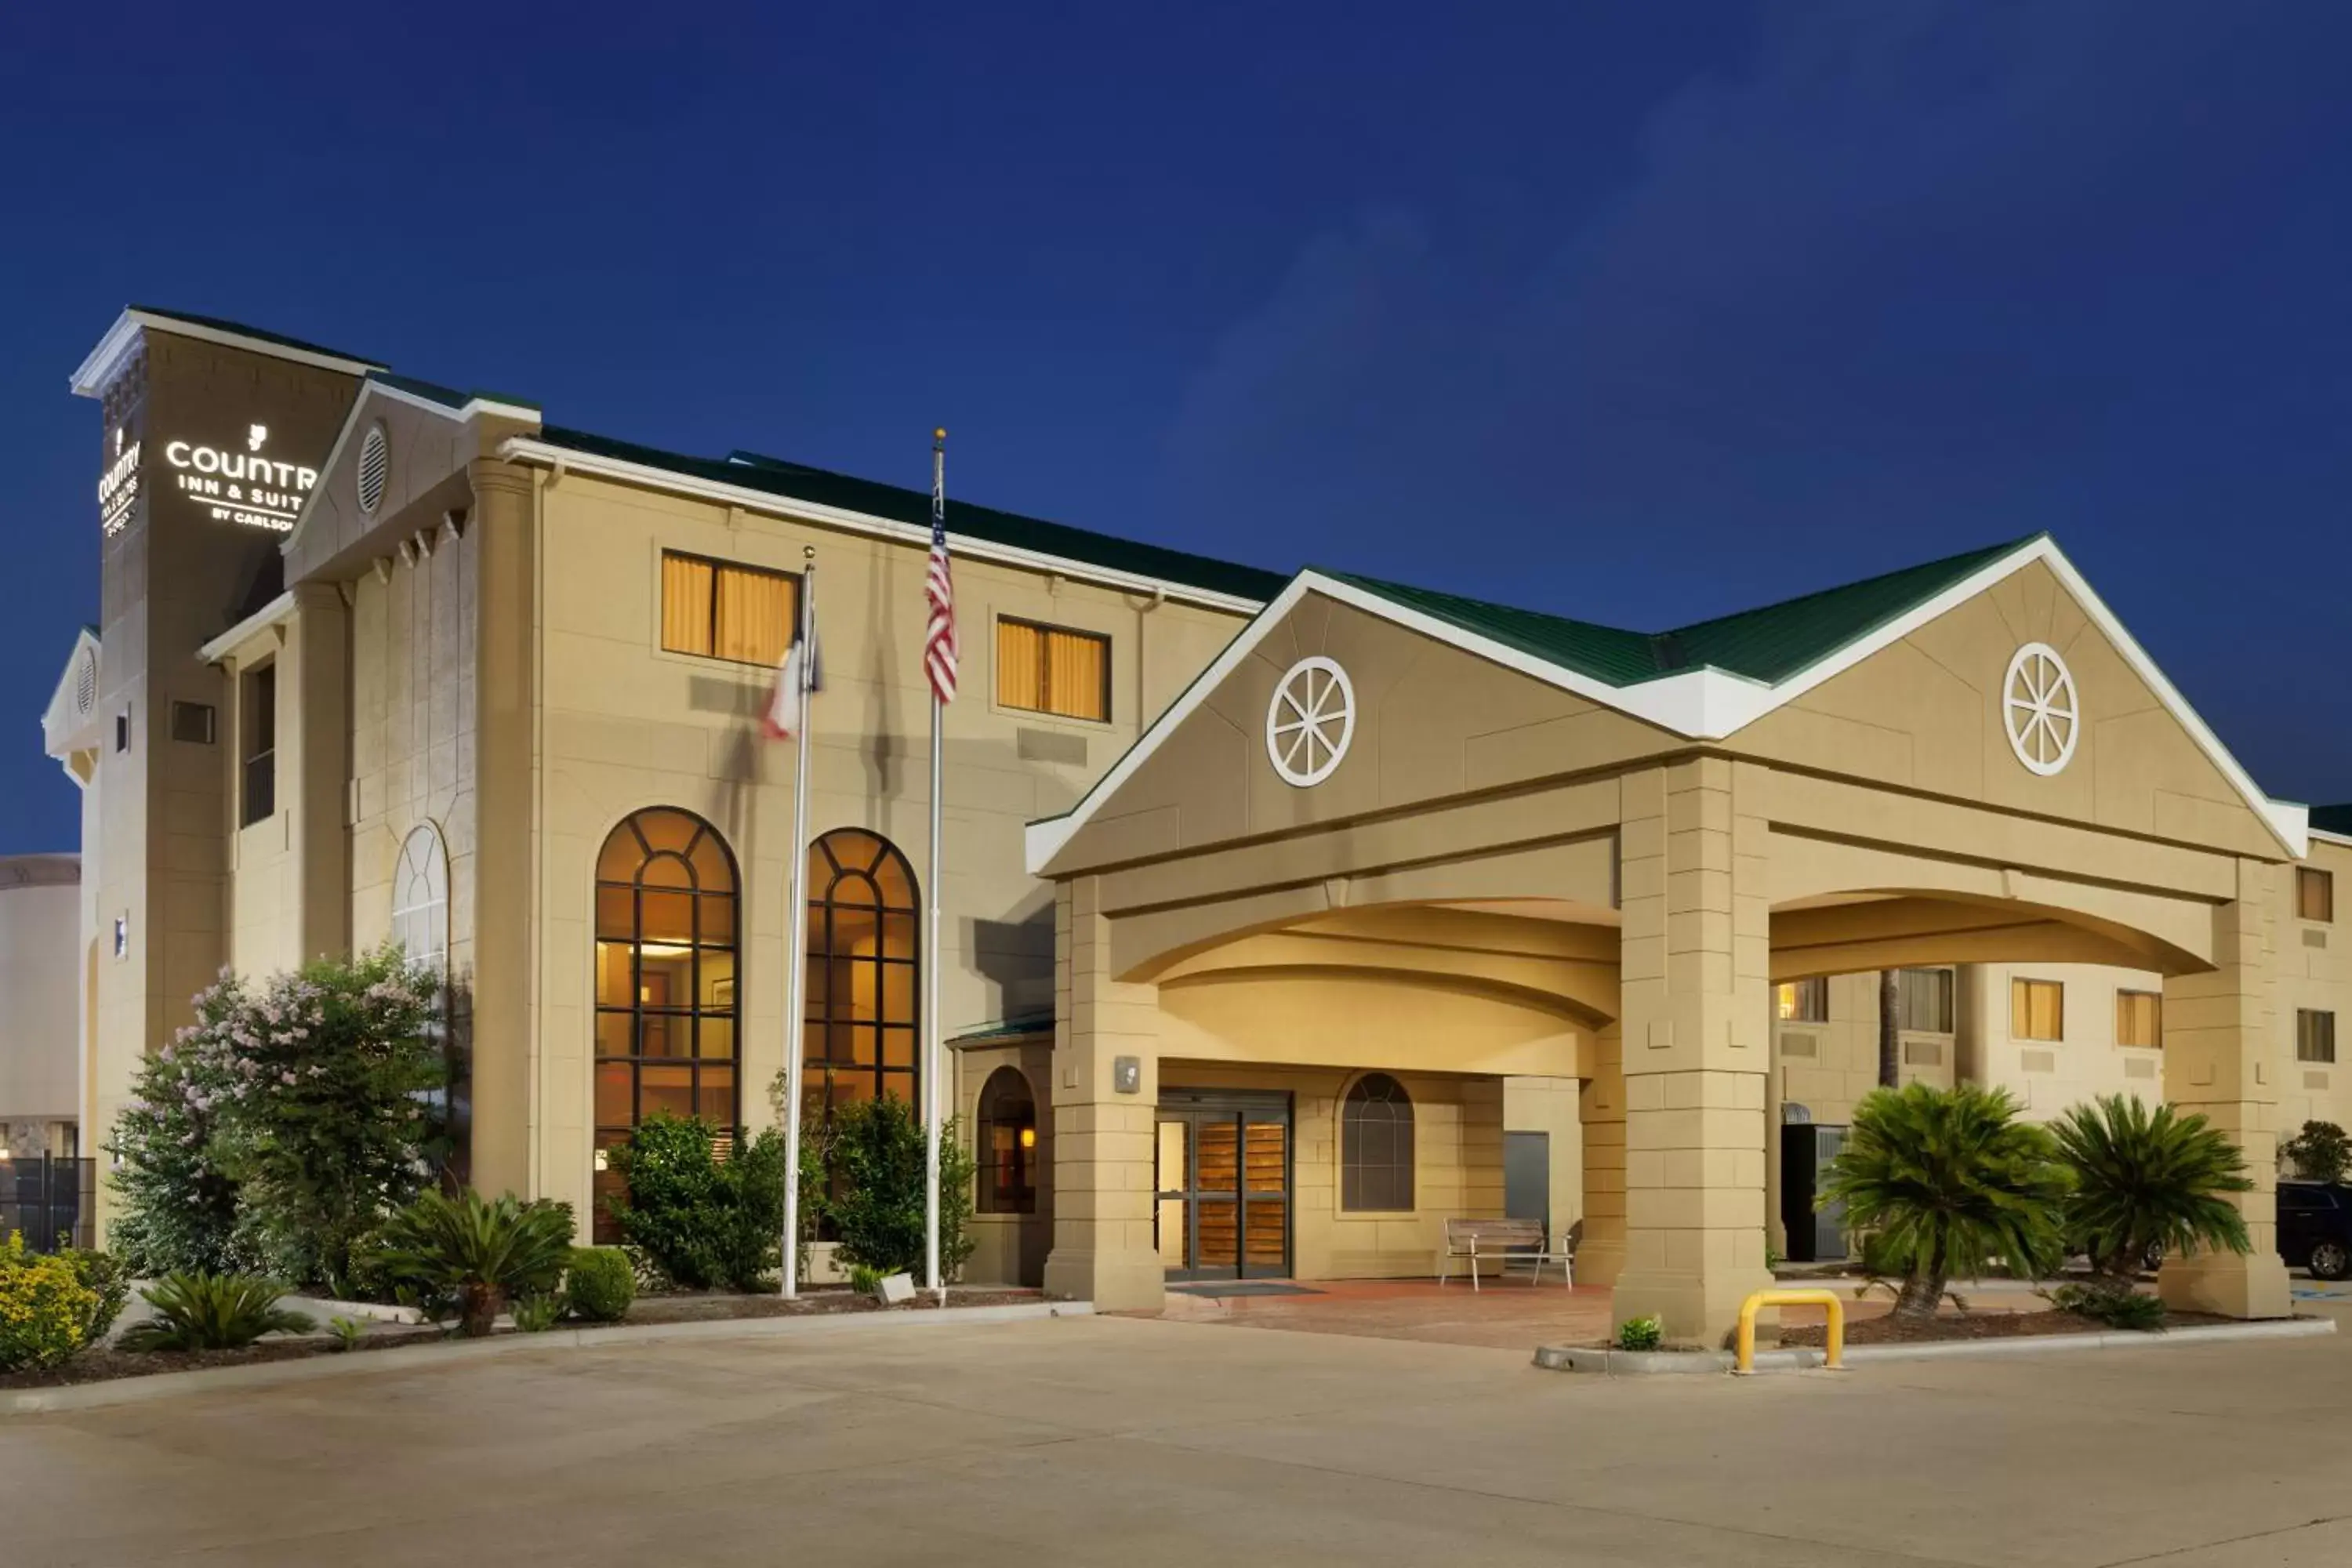 Property Building in Country Inn & Suites by Radisson, Houston Northwest, TX